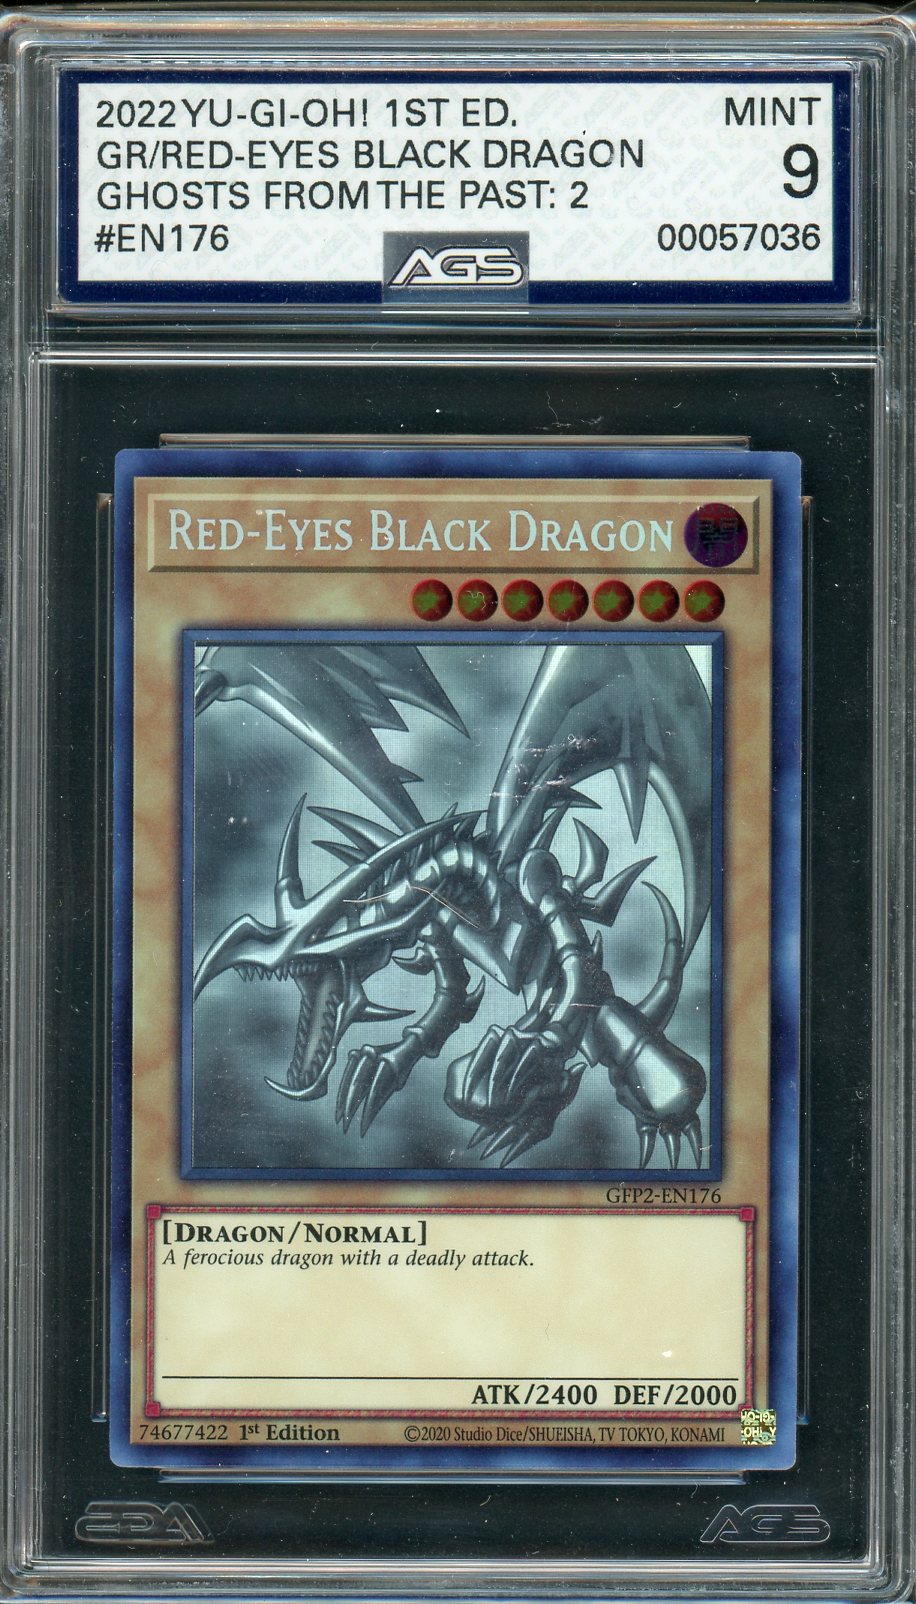 AGS (MINT 9) Red-Eyes Black Dragon #EN176 - Ghosts From The Past The 2nd Haunting (#00057036)